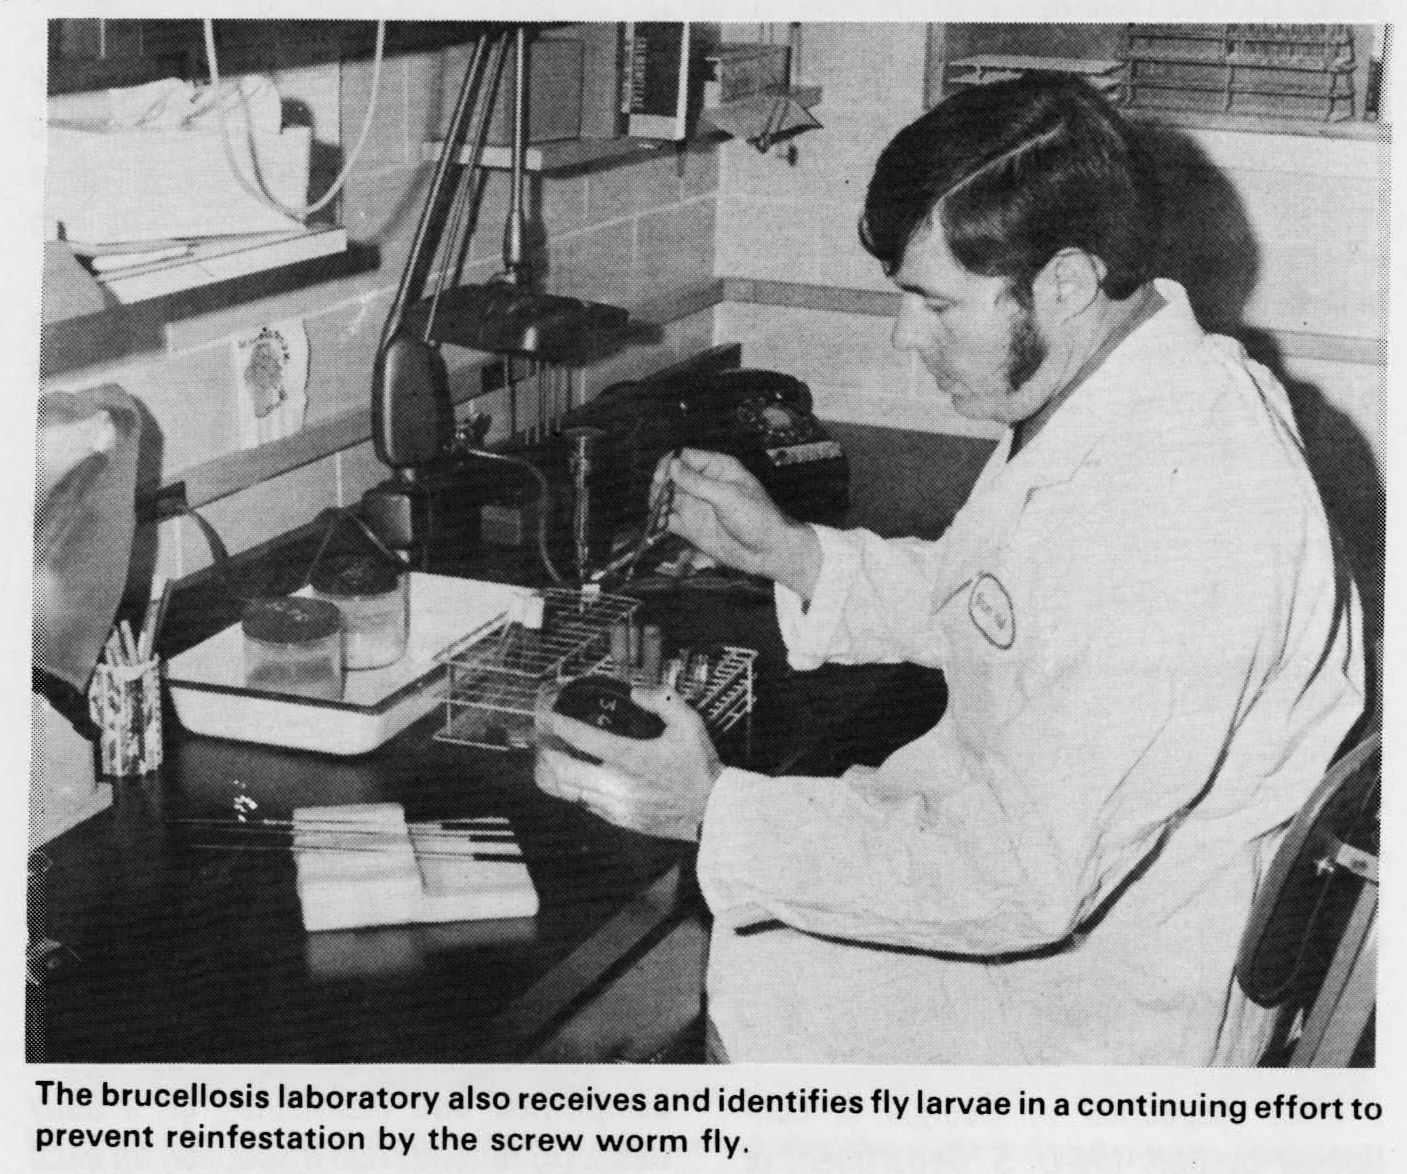 (1974) Testing of fly larvae being done at the lab.